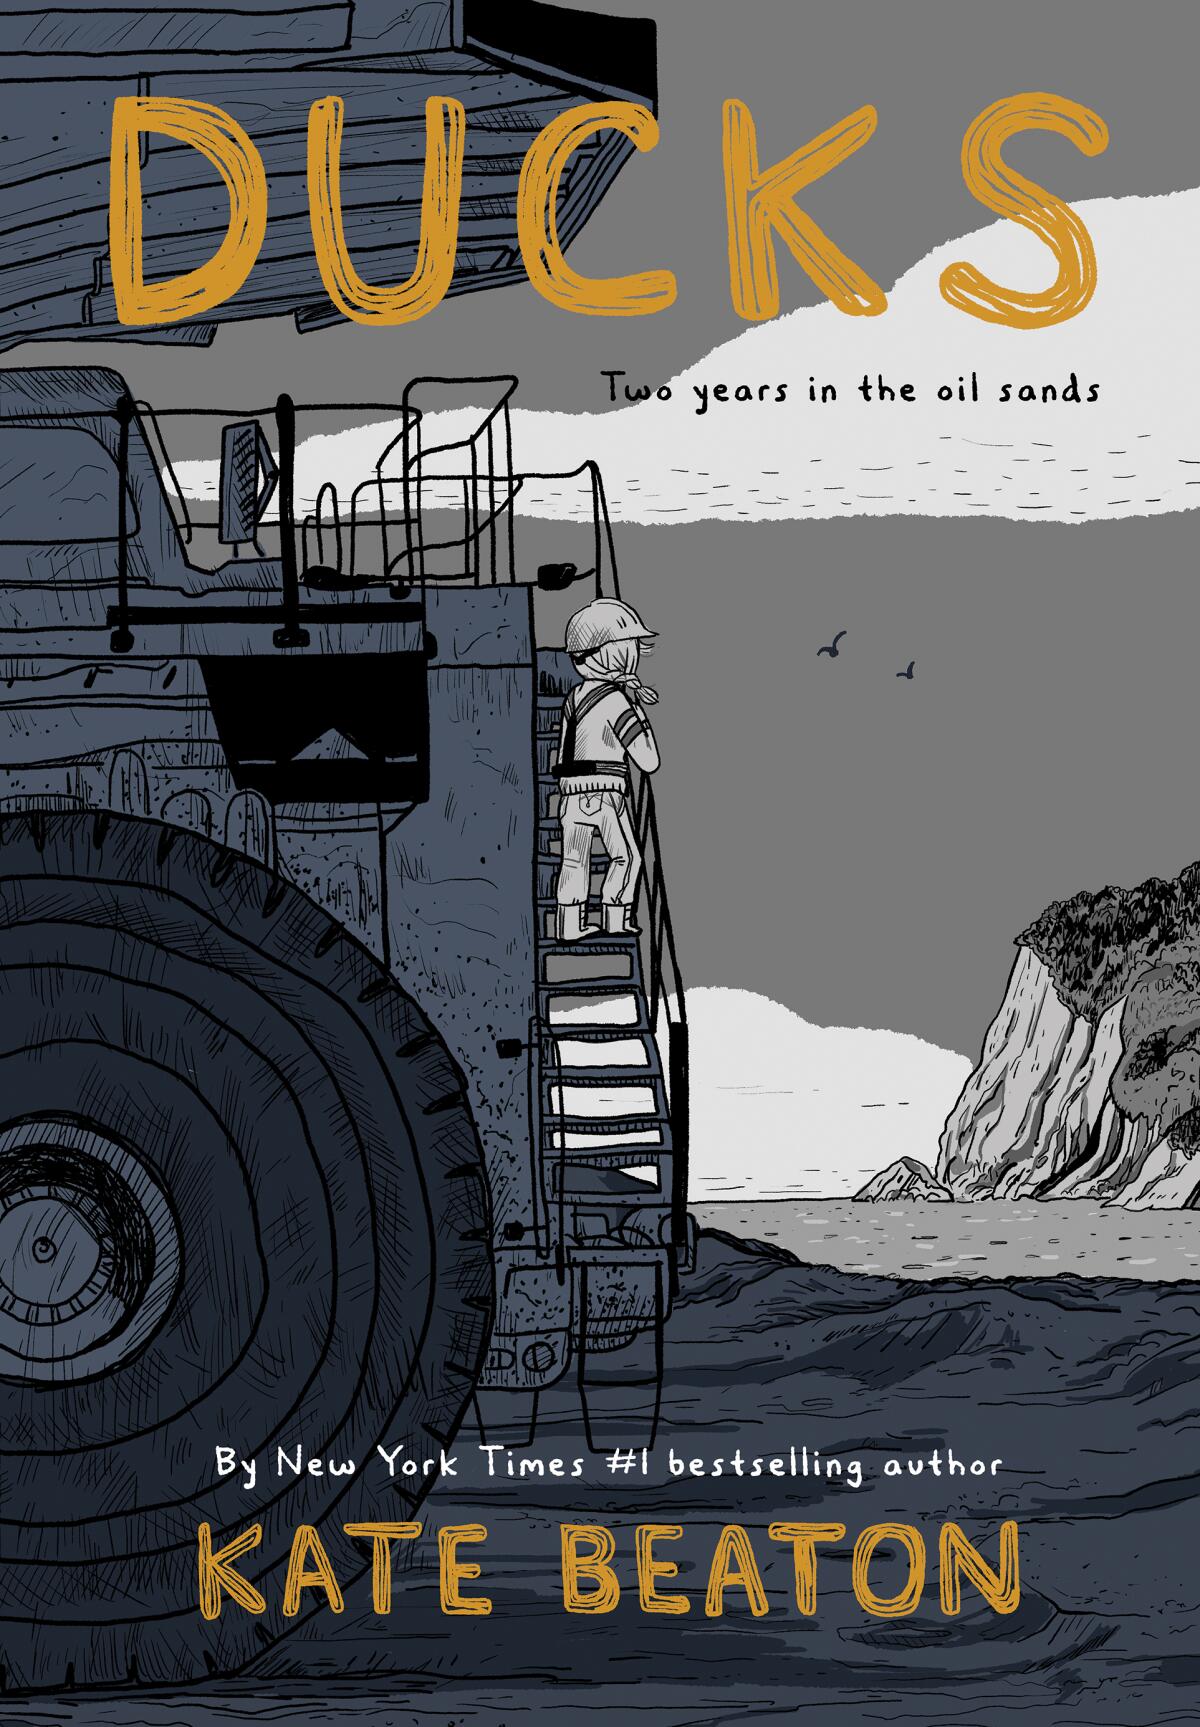 "Ducks: Two Years in the Oil Sands," by Kate Beaton